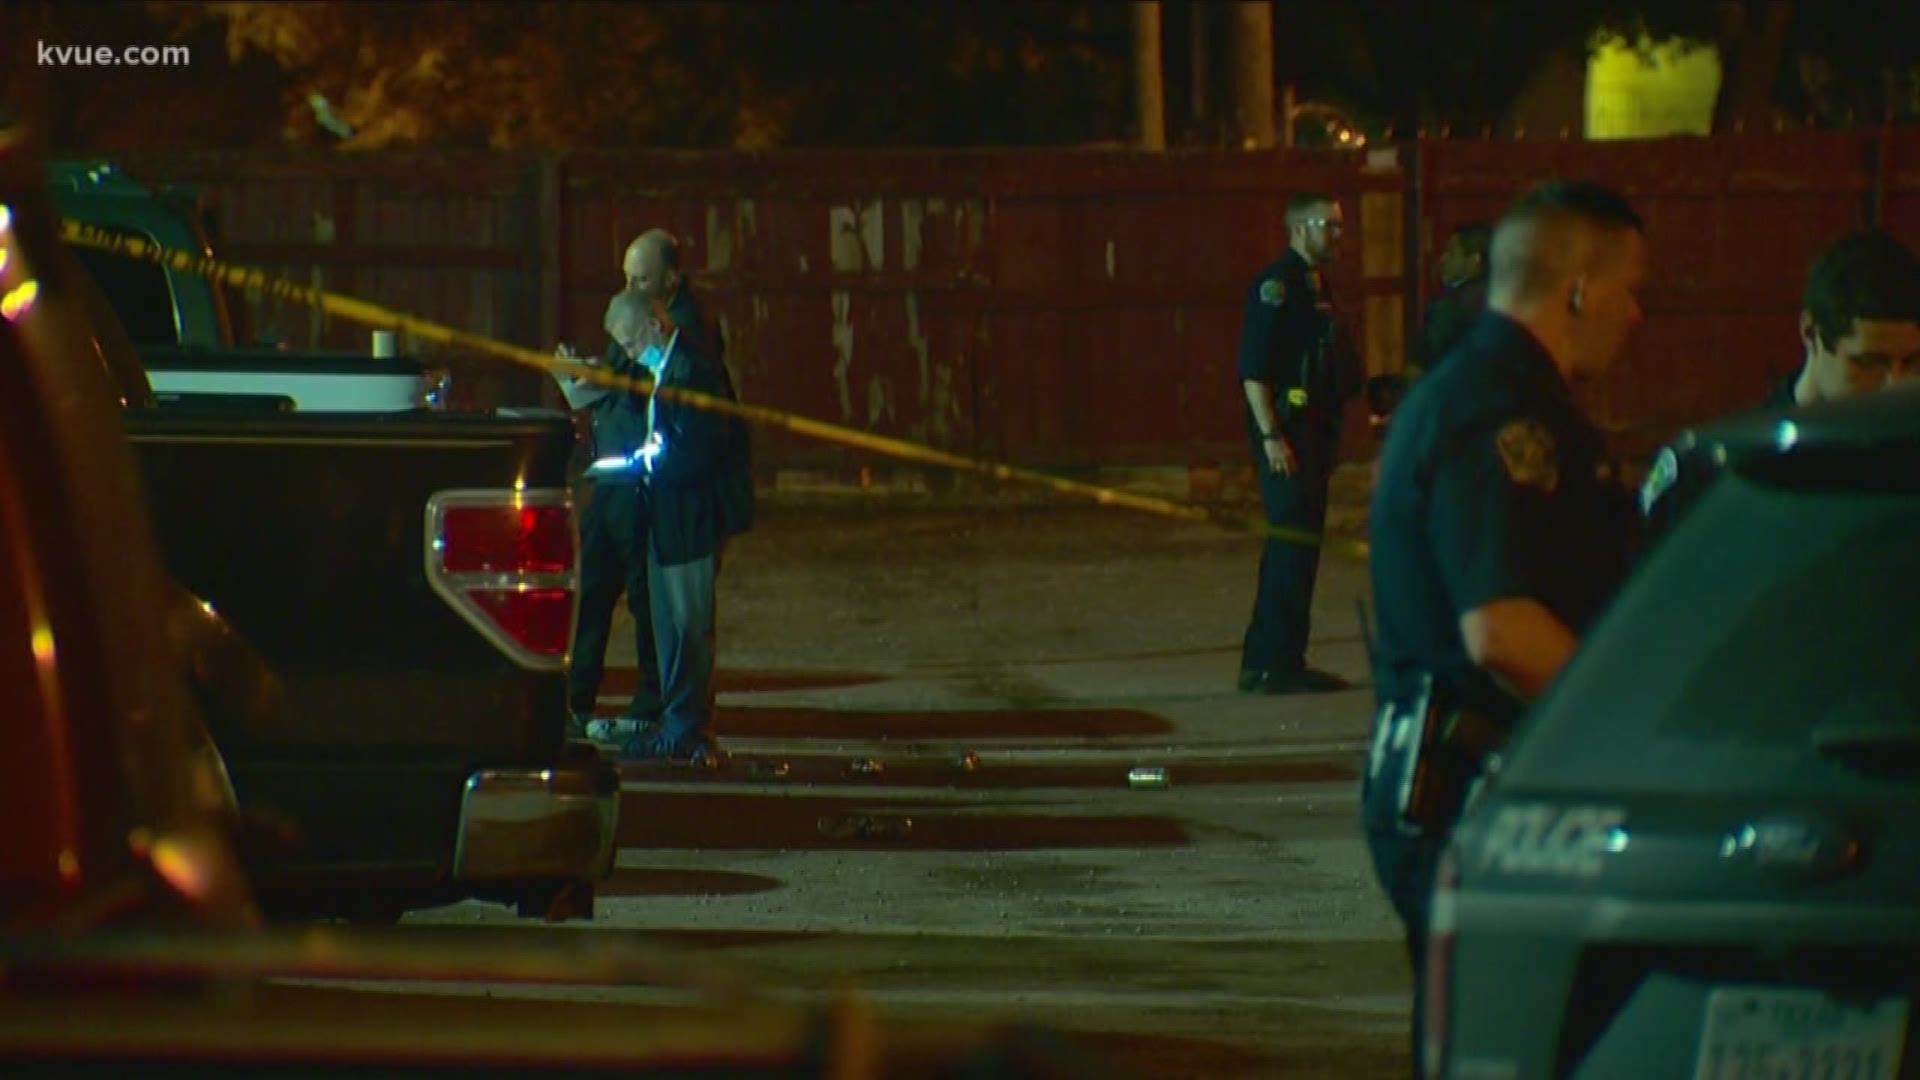 Police are working to figure out what led to a deadly shooting Monday night at a northeast Austin apartment complex.